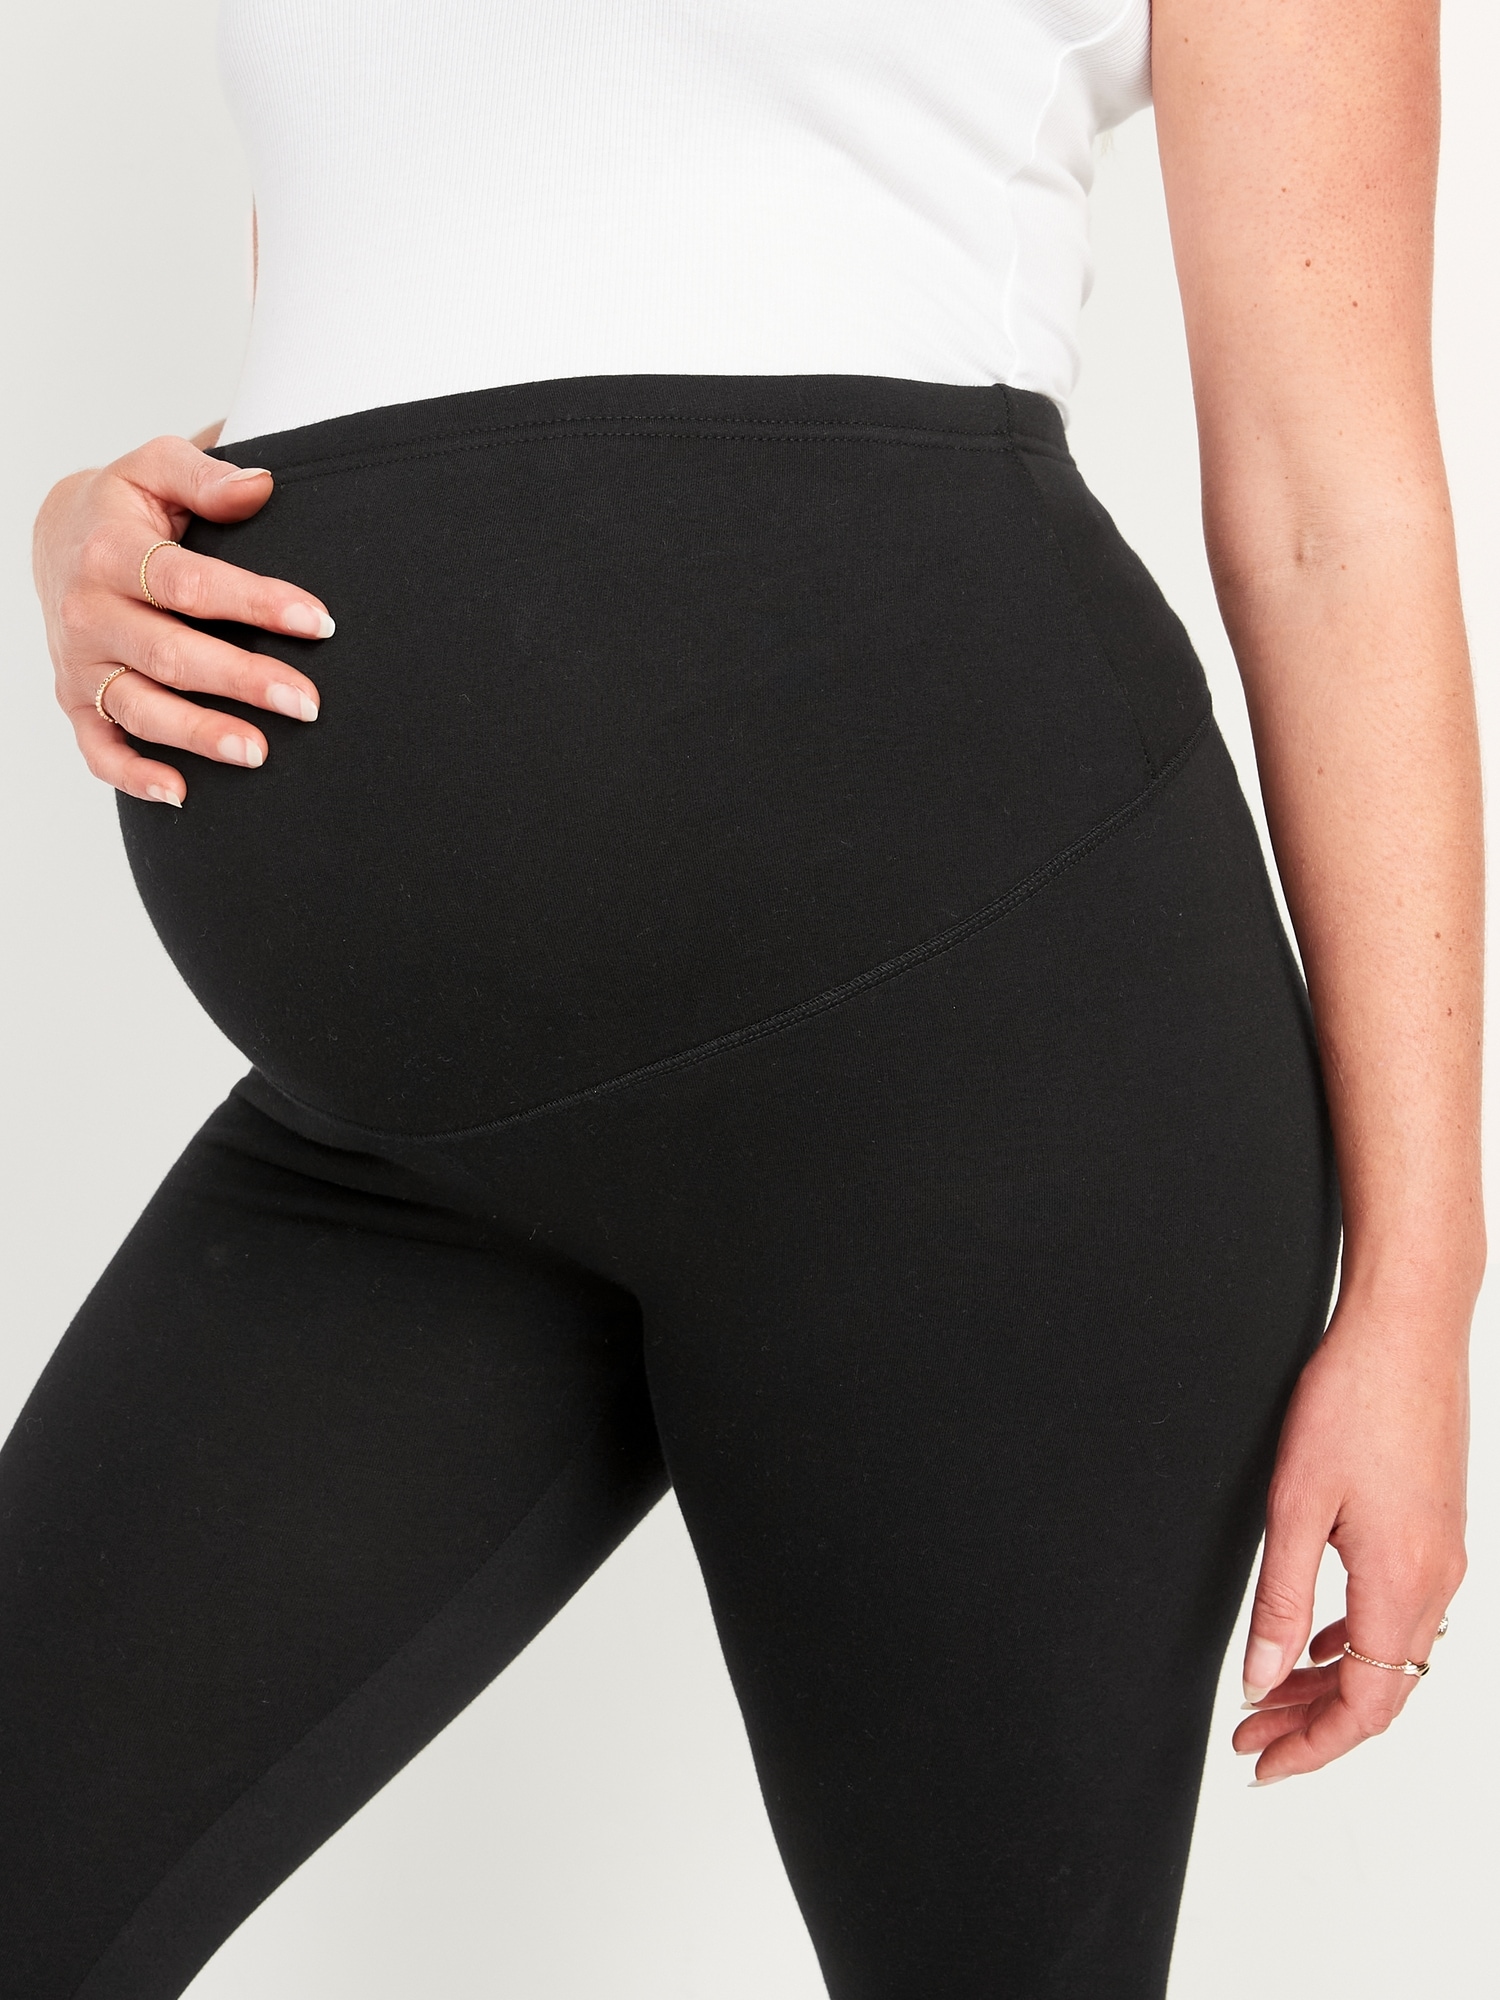 High Waist Striped Maternity Maternity Fleece Leggings For Comfortable  Pregnancy Skinny Sports Clothes For Fitness And Wear From Dp02, $9.47